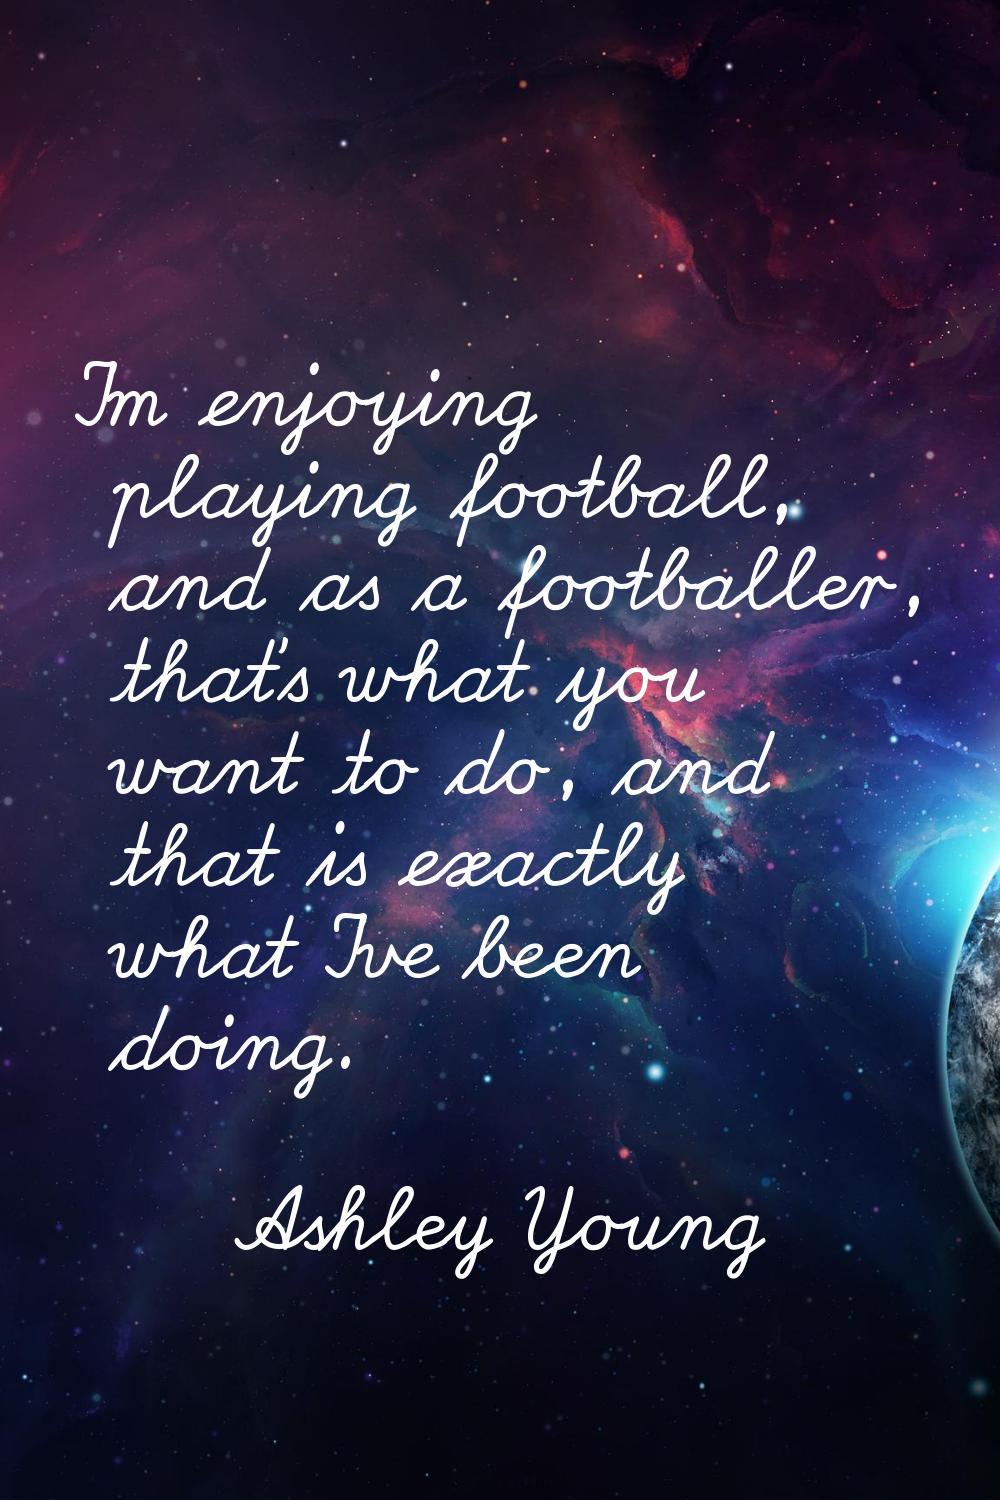 I'm enjoying playing football, and as a footballer, that's what you want to do, and that is exactly